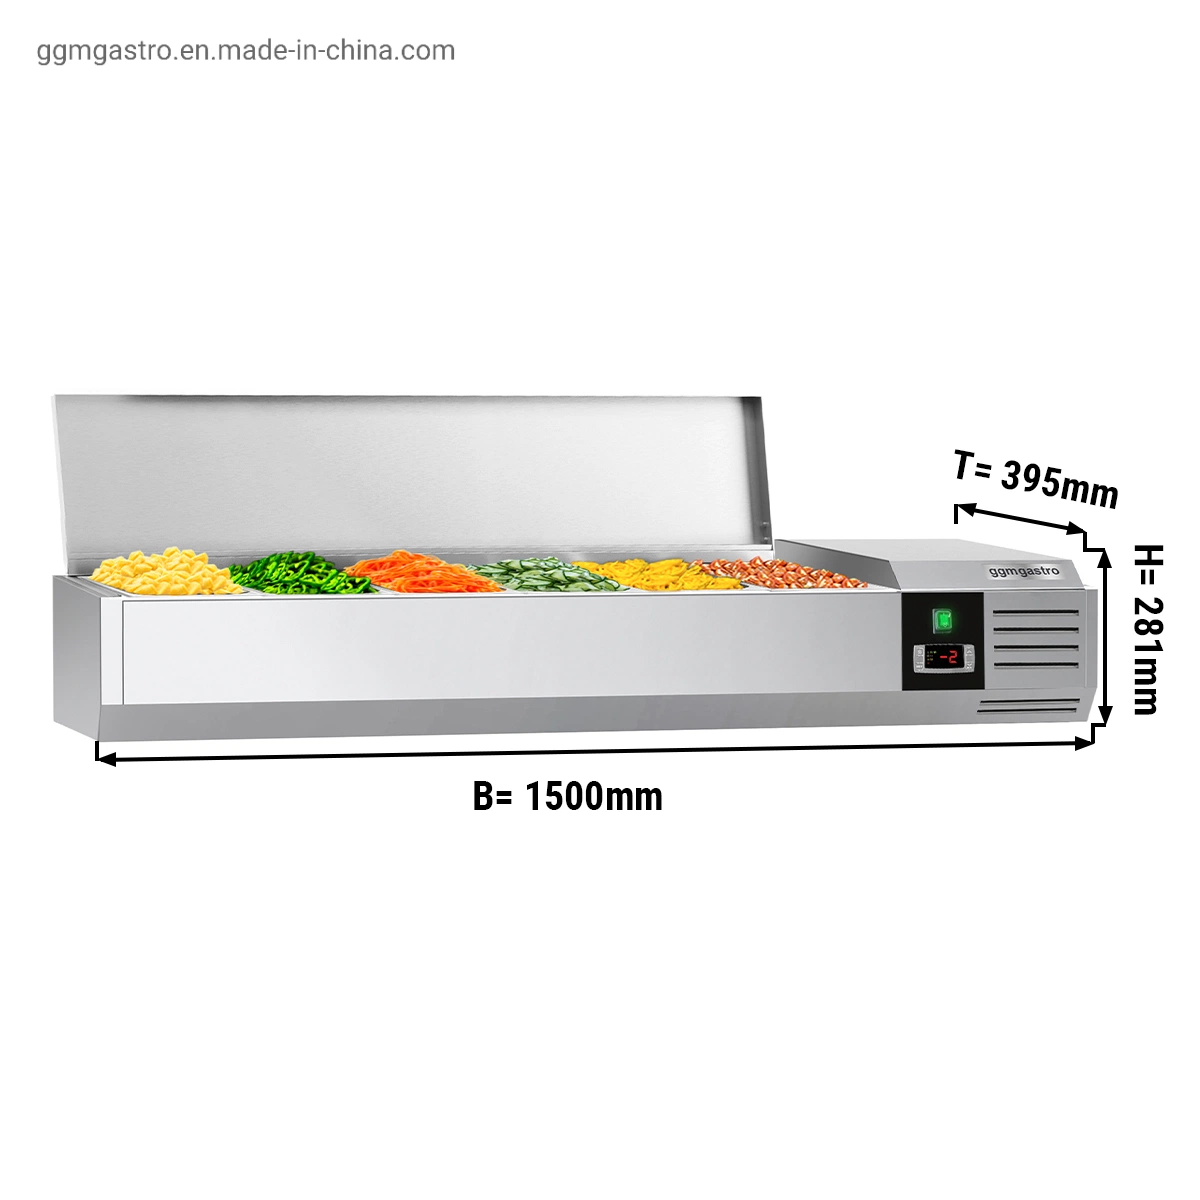 Cooling and Presentation Refrigerated Table Top Displays Refrigerated Table Top Display